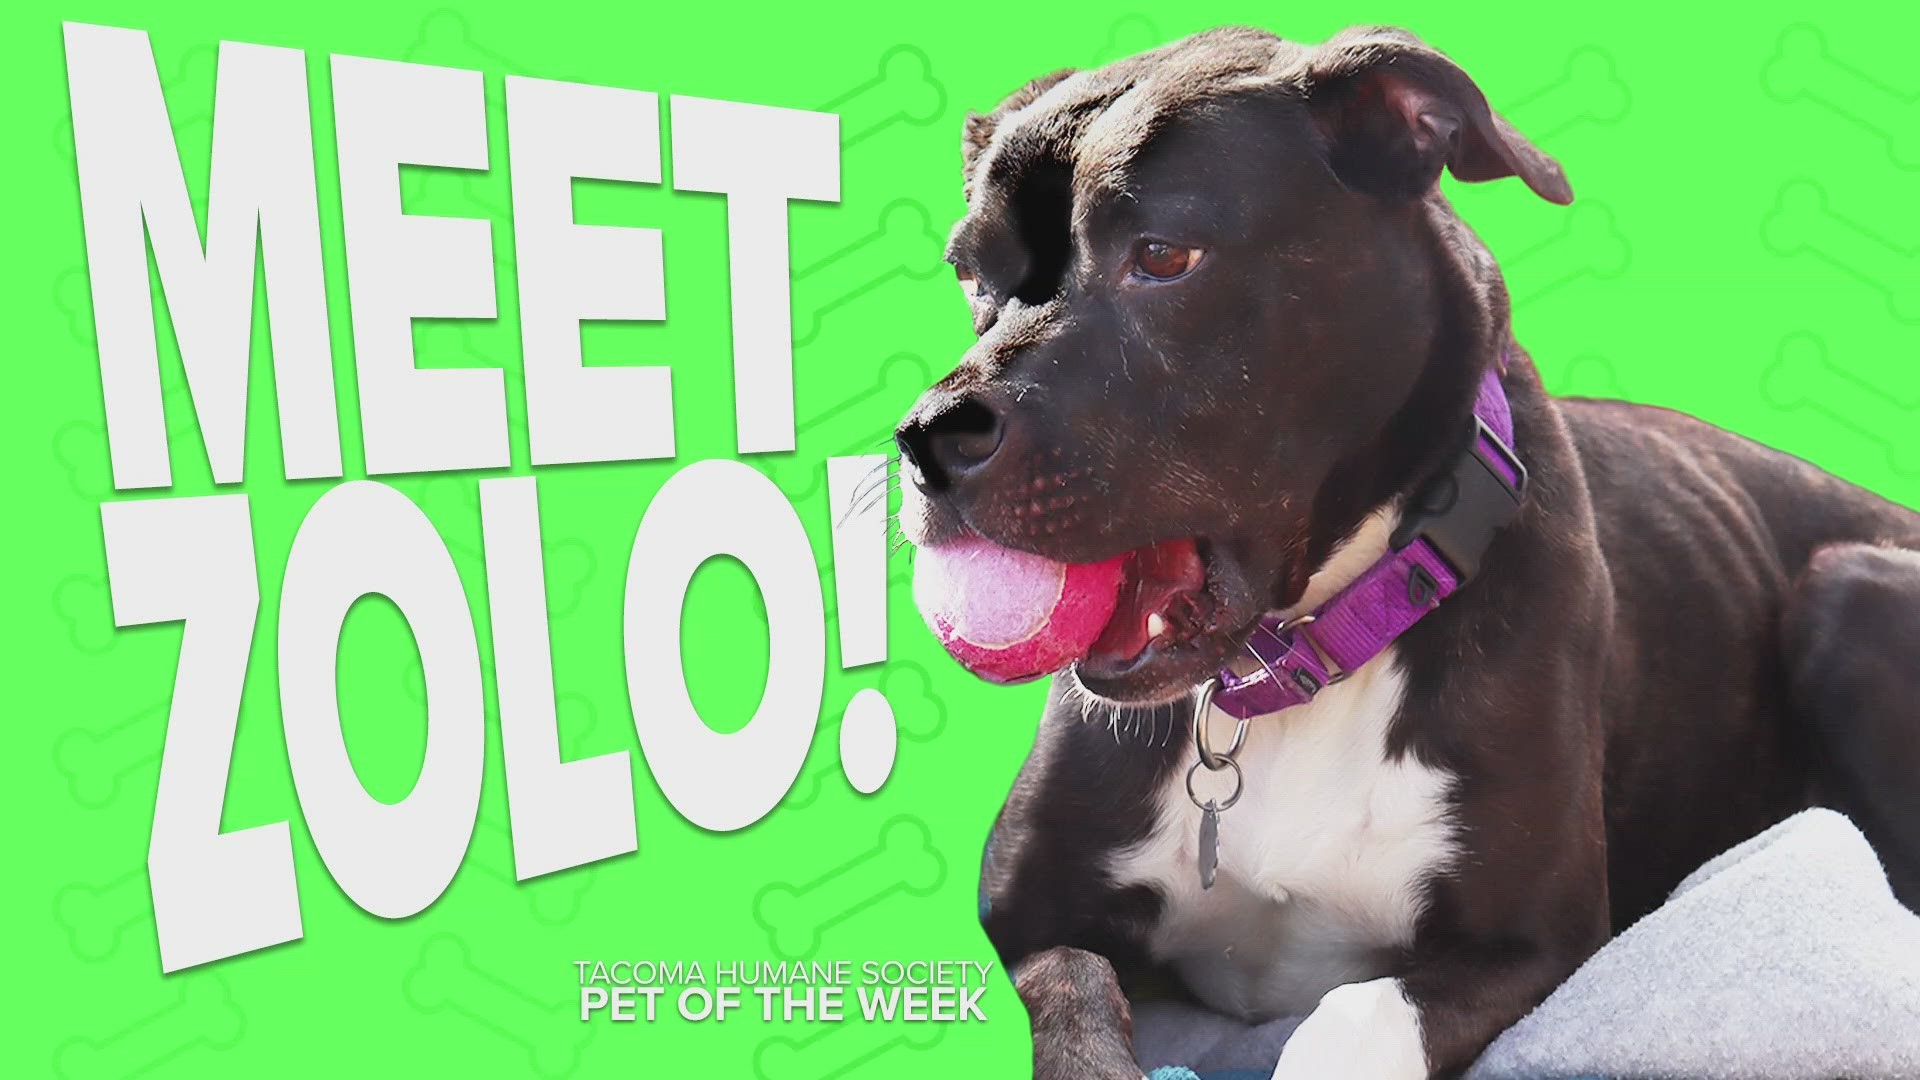 This week's featured adoptable pet of the week is Zolo!